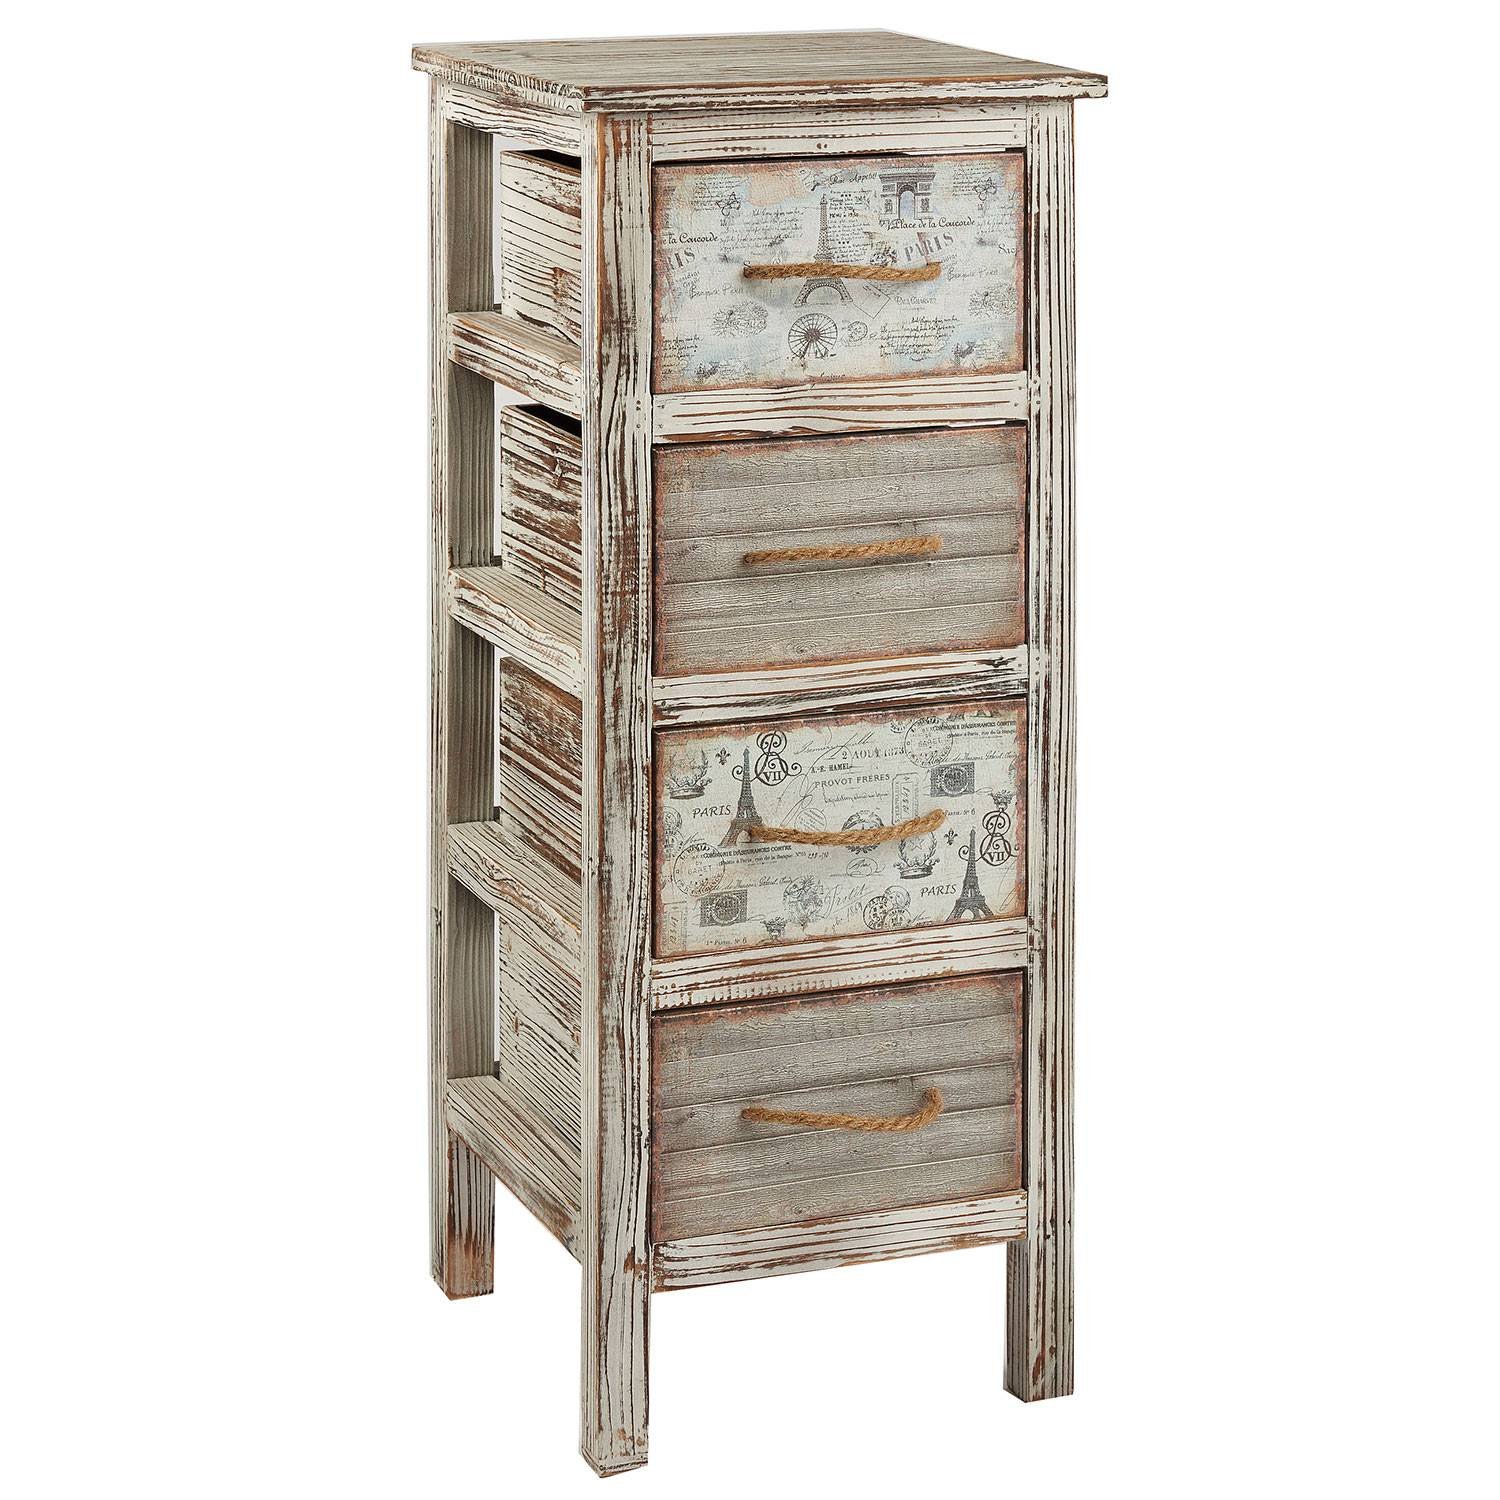 Shabby Chic Furniture Manufacturers